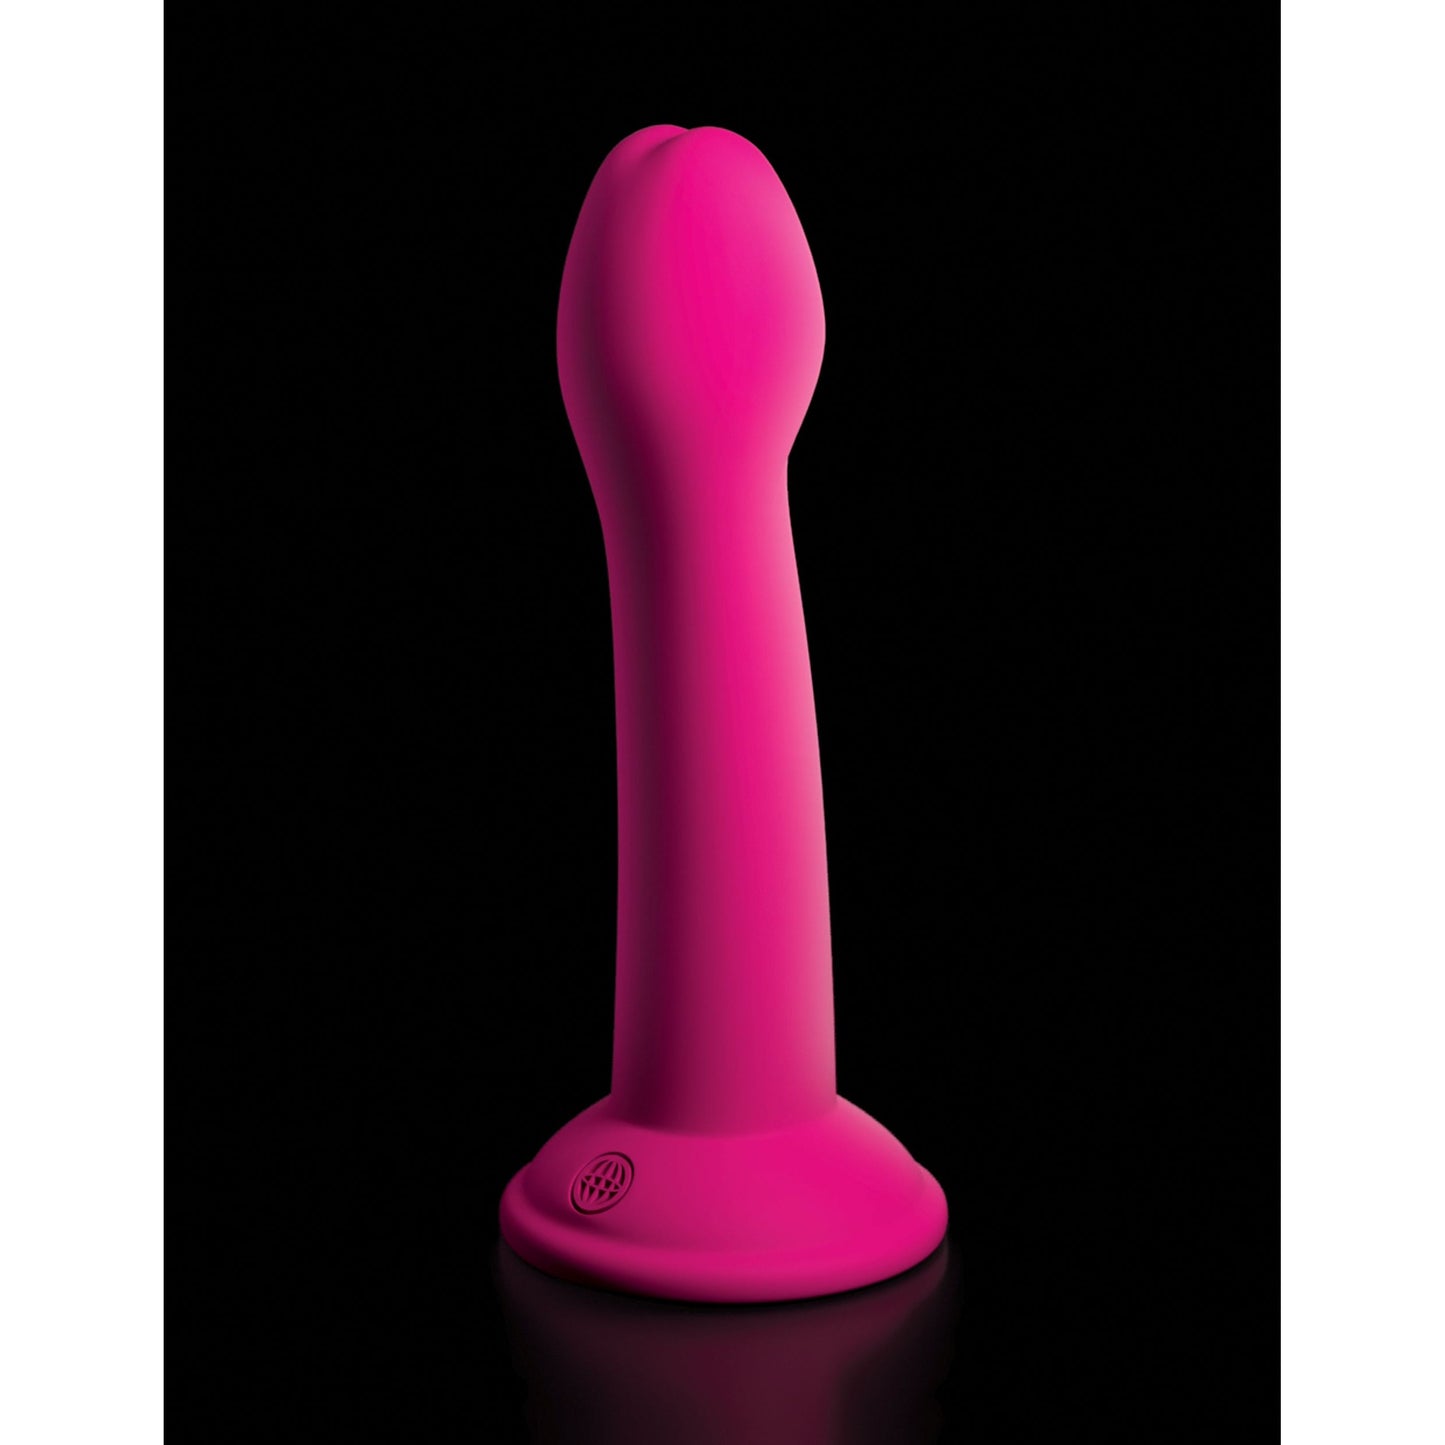 Dillio 6'' Please-Her - Pink 15.2 cm Dong - My Temptations Sex Shop